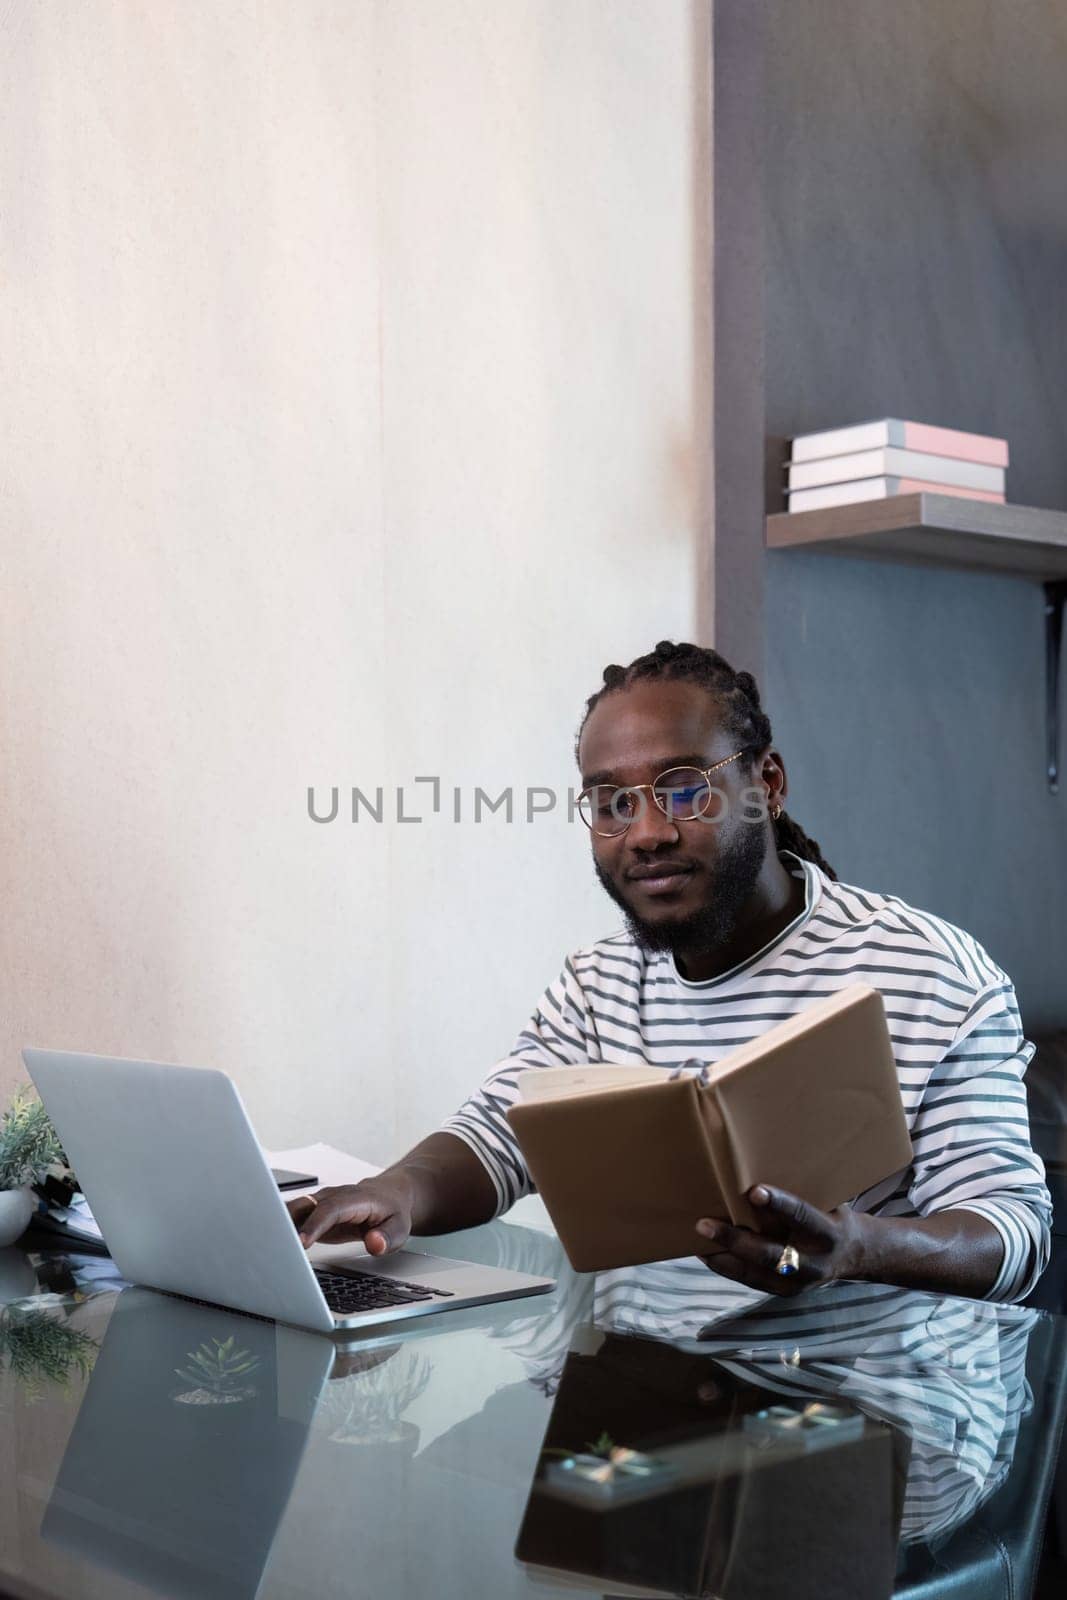 Young african man using laptop at home, black male looking at read book relaxing on leisure with work sit on glass table in living room.